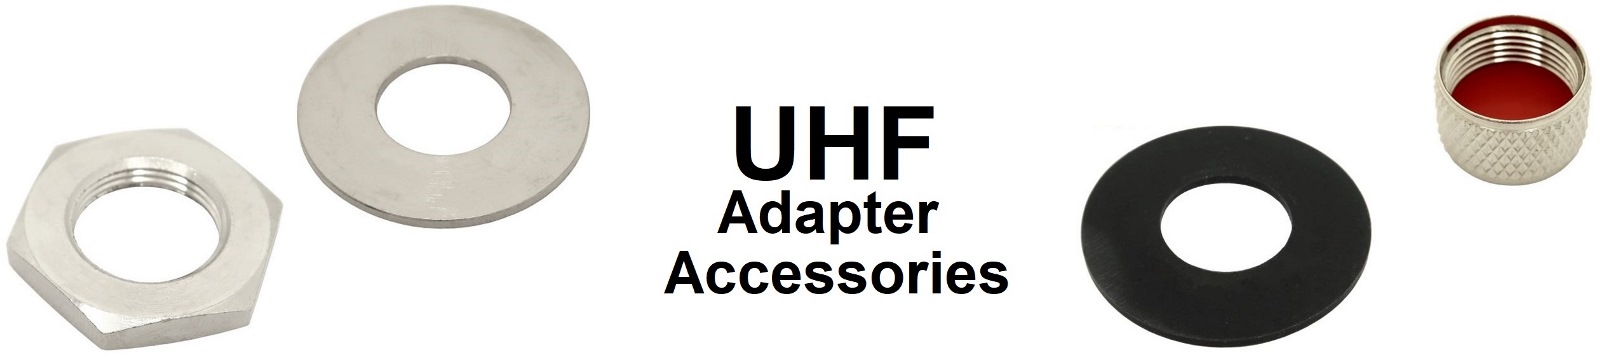 UHF Adapter Accessories Category Banner - Max-Gain Systems, Inc.